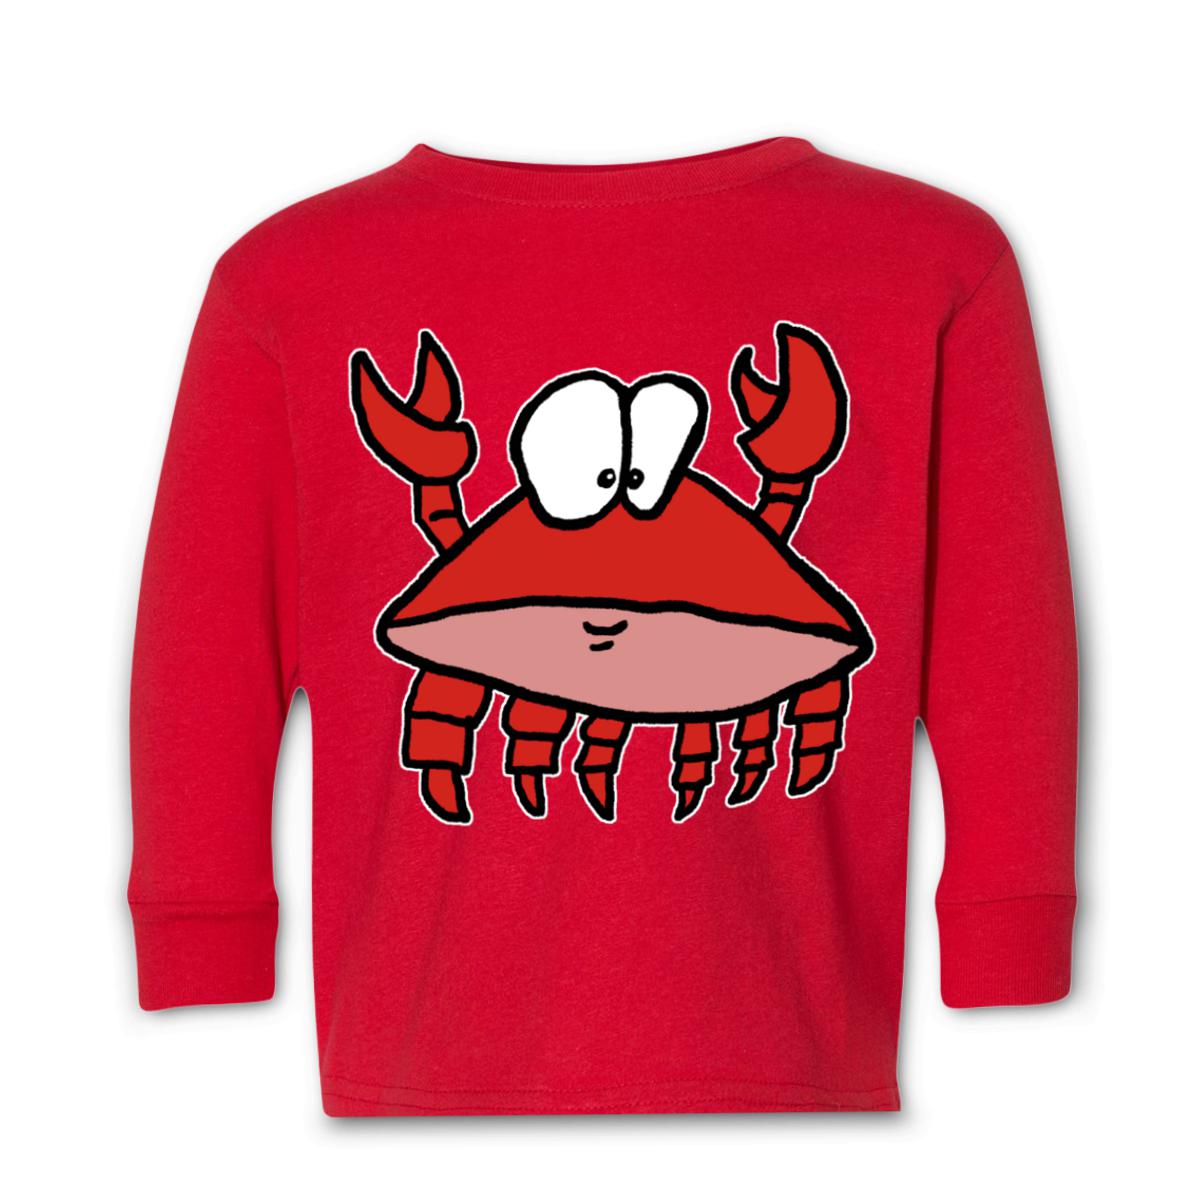 Crab 2.0 Toddler Long Sleeve Tee 4T red